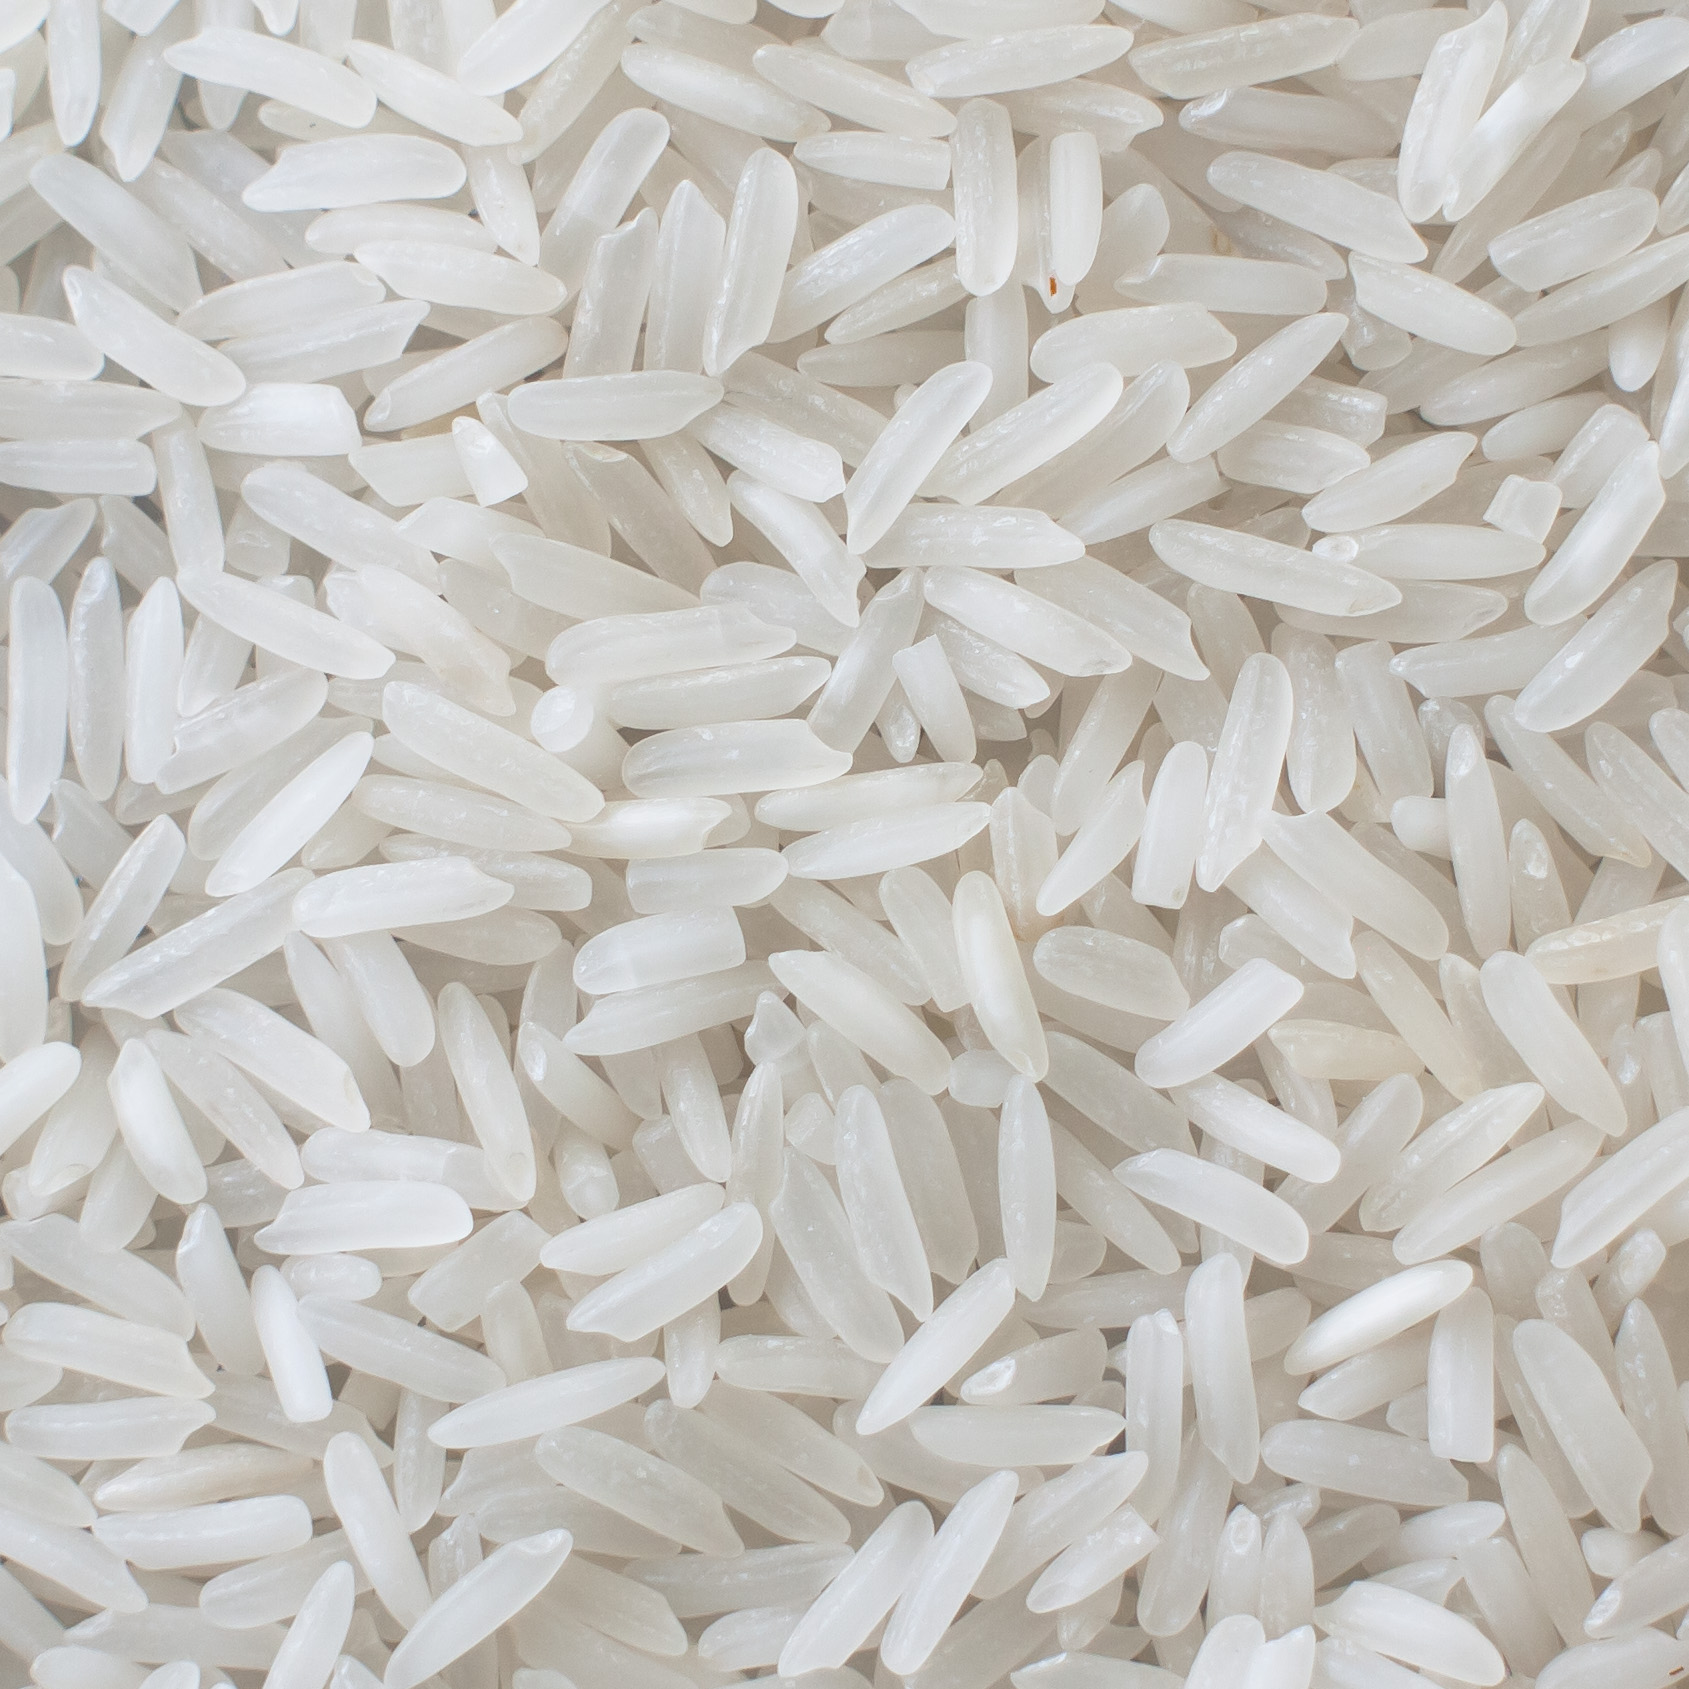 Manufacturers Exporters and Wholesale Suppliers of Rice Ahmedabad Gujarat